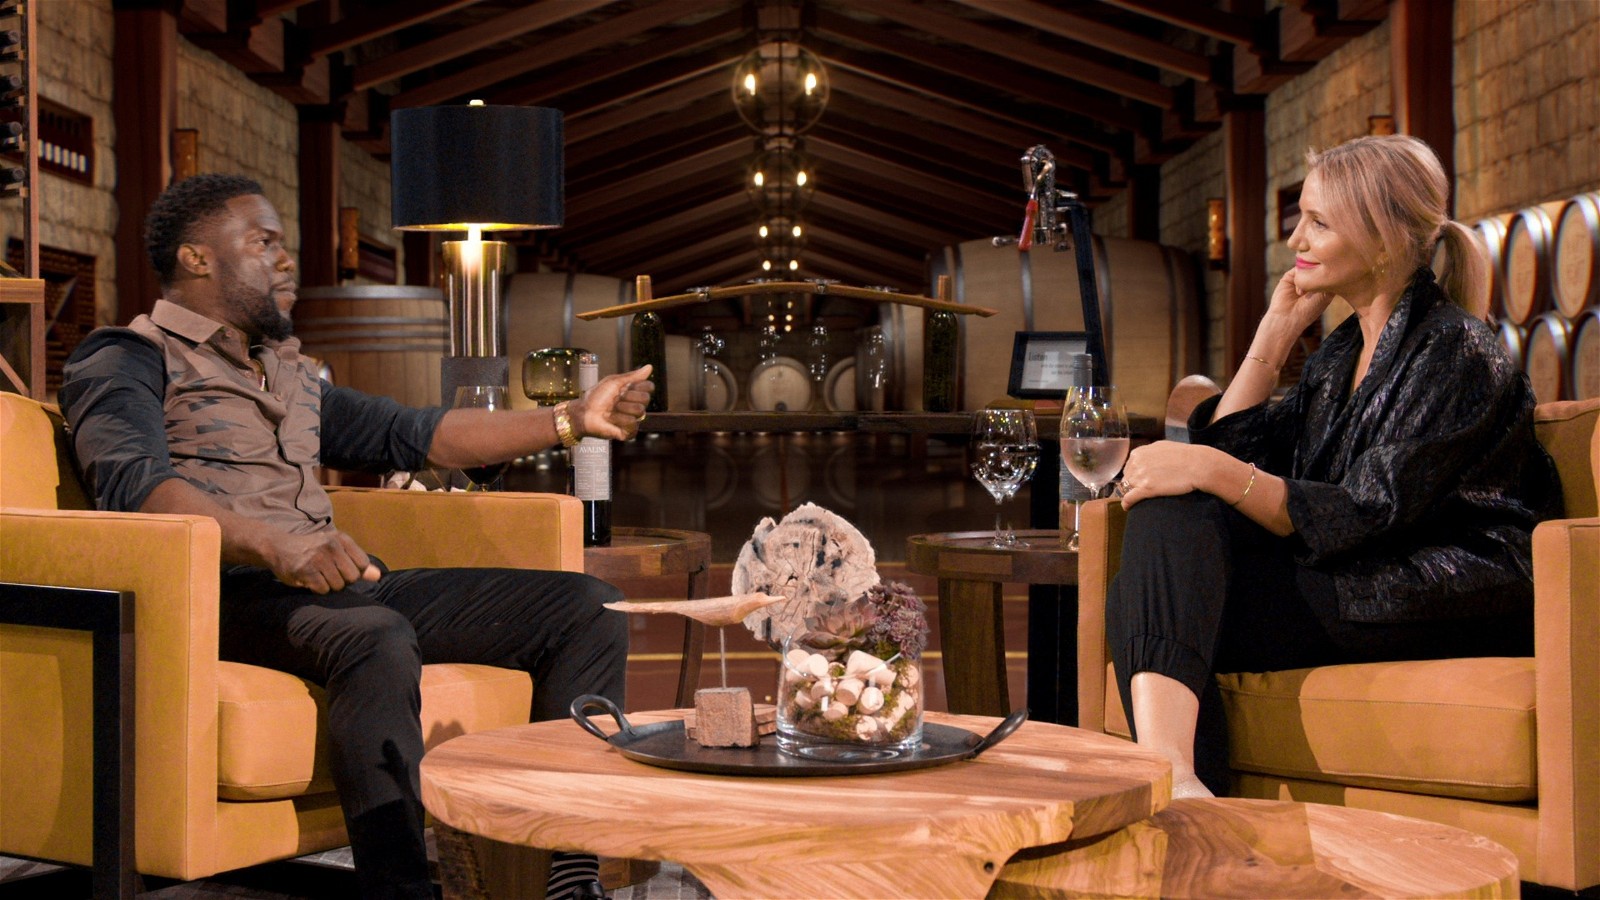 In addition to films, Kevin hart hosts his popyalr talk show Hart to Heart